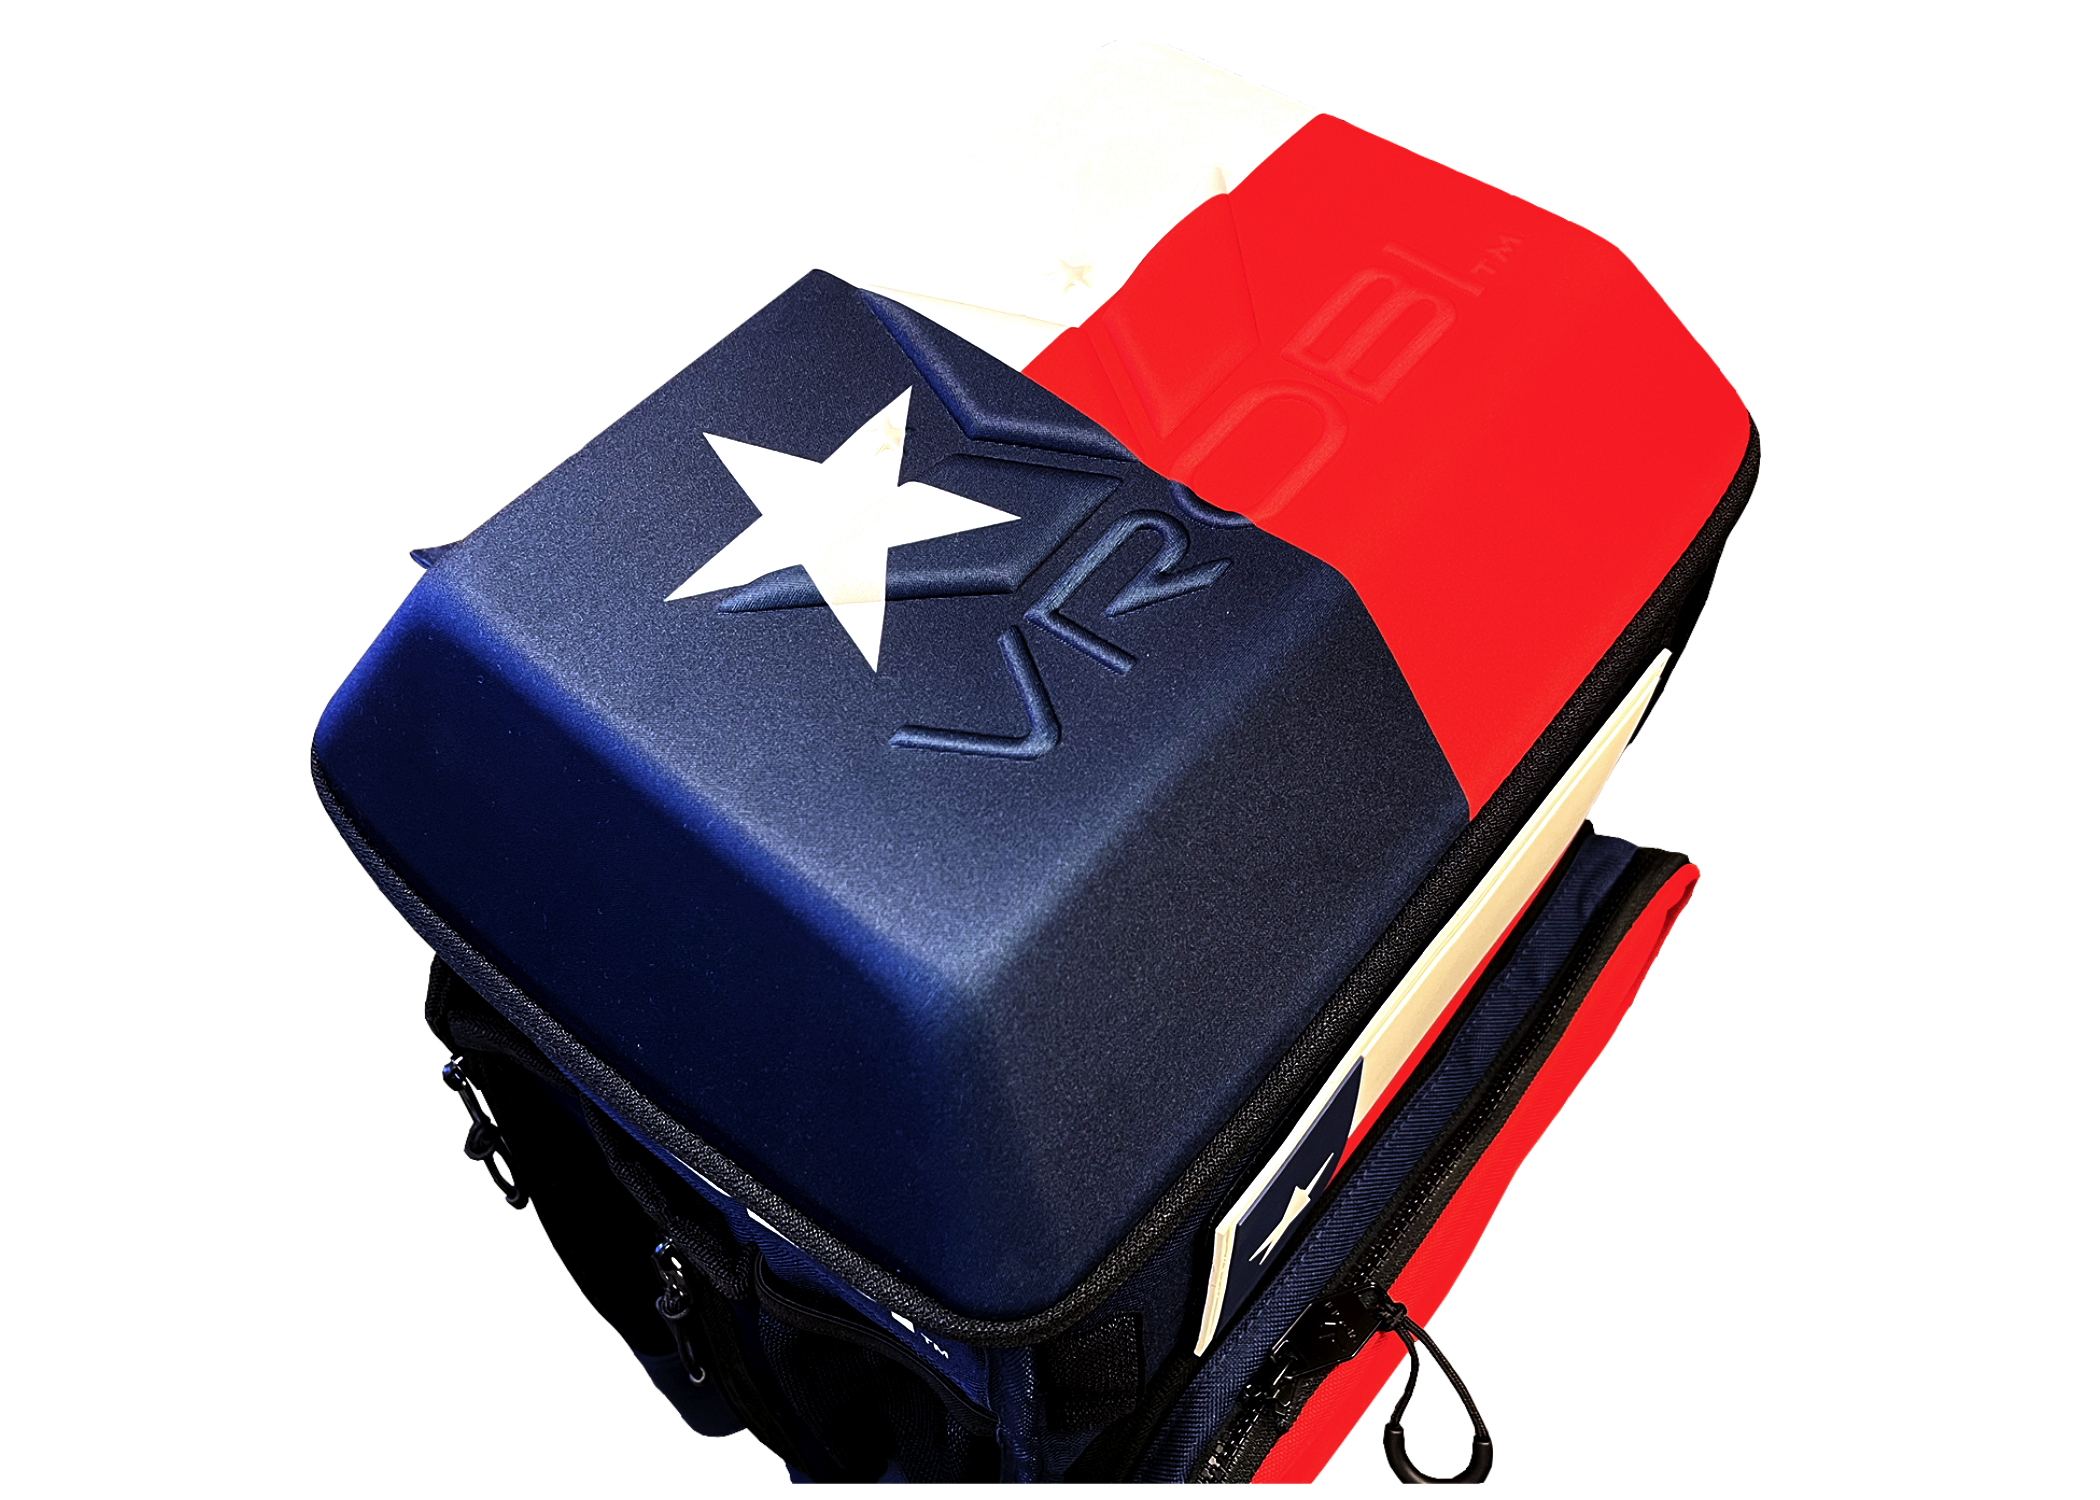 SOLDIER HS RELOADED ONE NATION LONE STAR EDITION BAT PACK